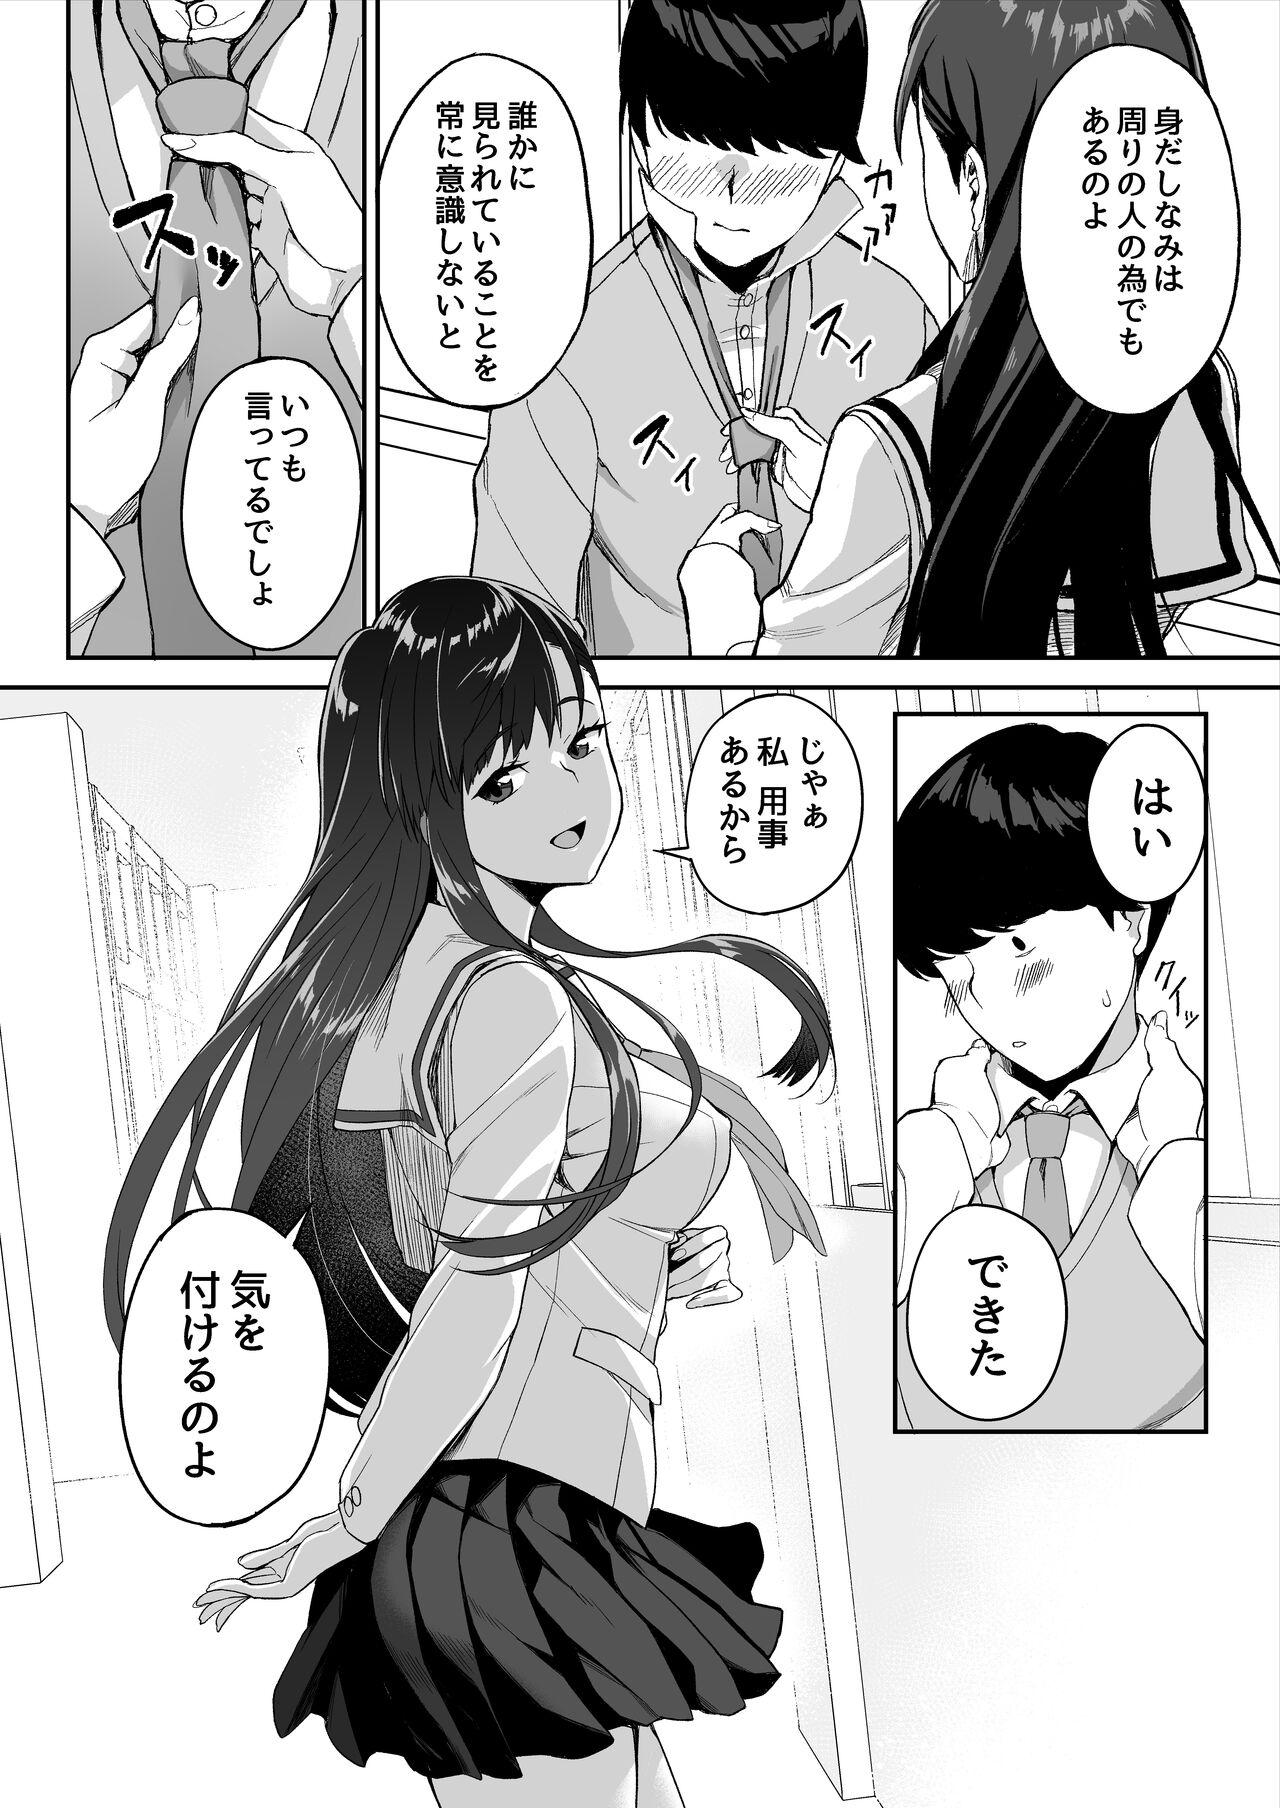 Sex Party 優等生の姉さんと本気のセックスで姉弟関係を終わらせる話 Firsttime - Page 7